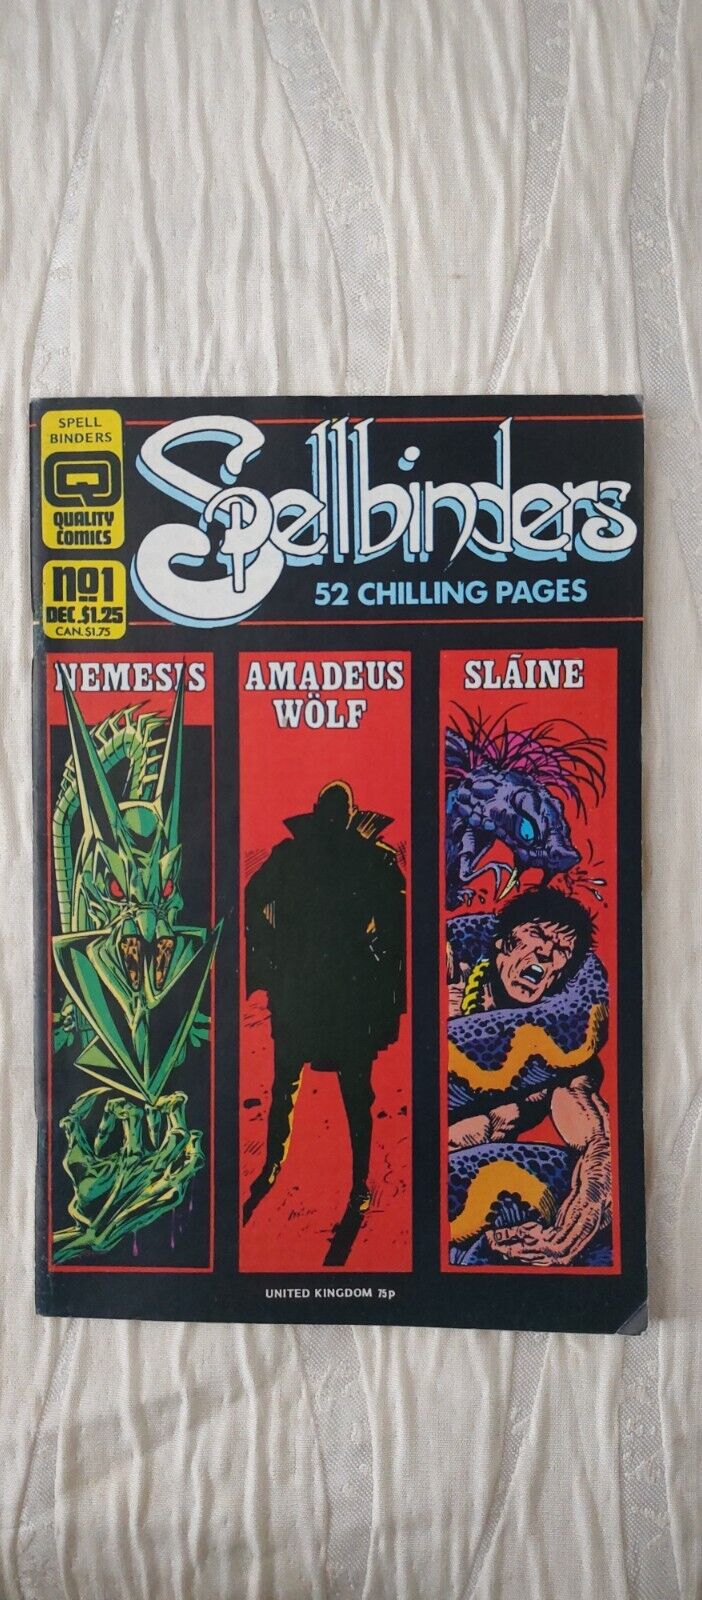 Cb21~comic book~rare spellbinders 52 chilling pages issue #1 Dec